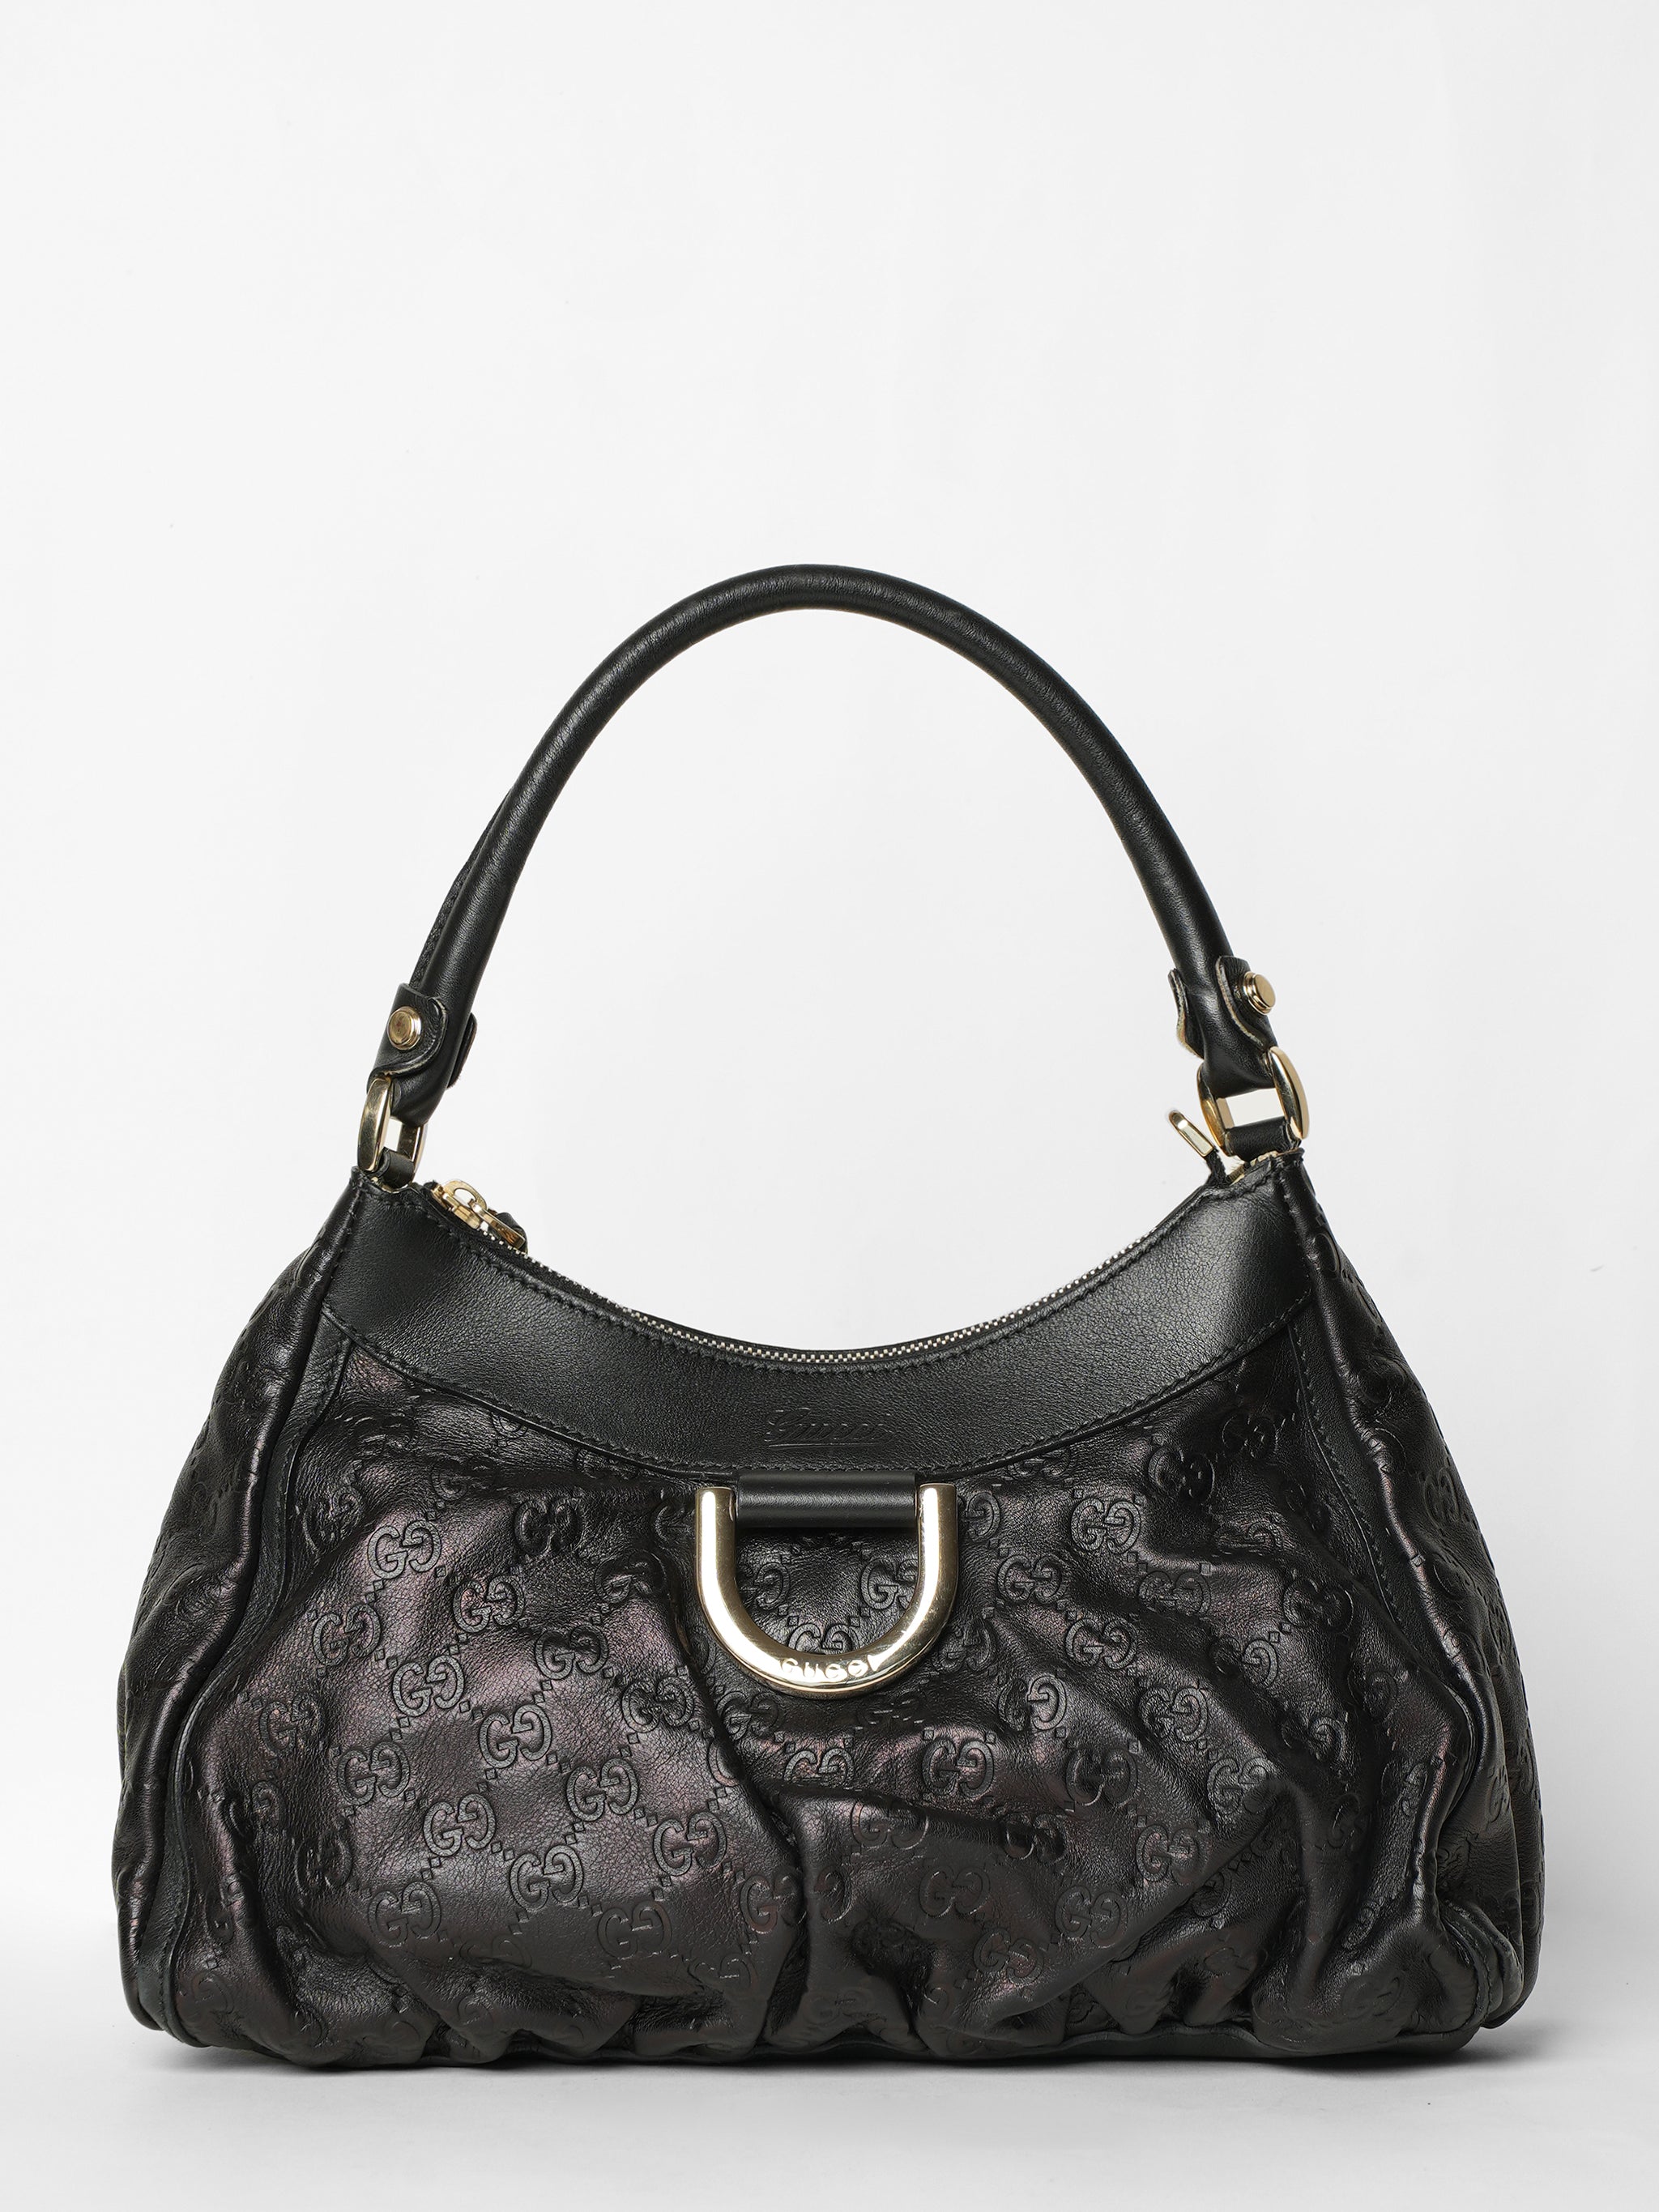 Gucci GG Abbey D-ring Hobo Shoulder Bag Black Patent Leather 